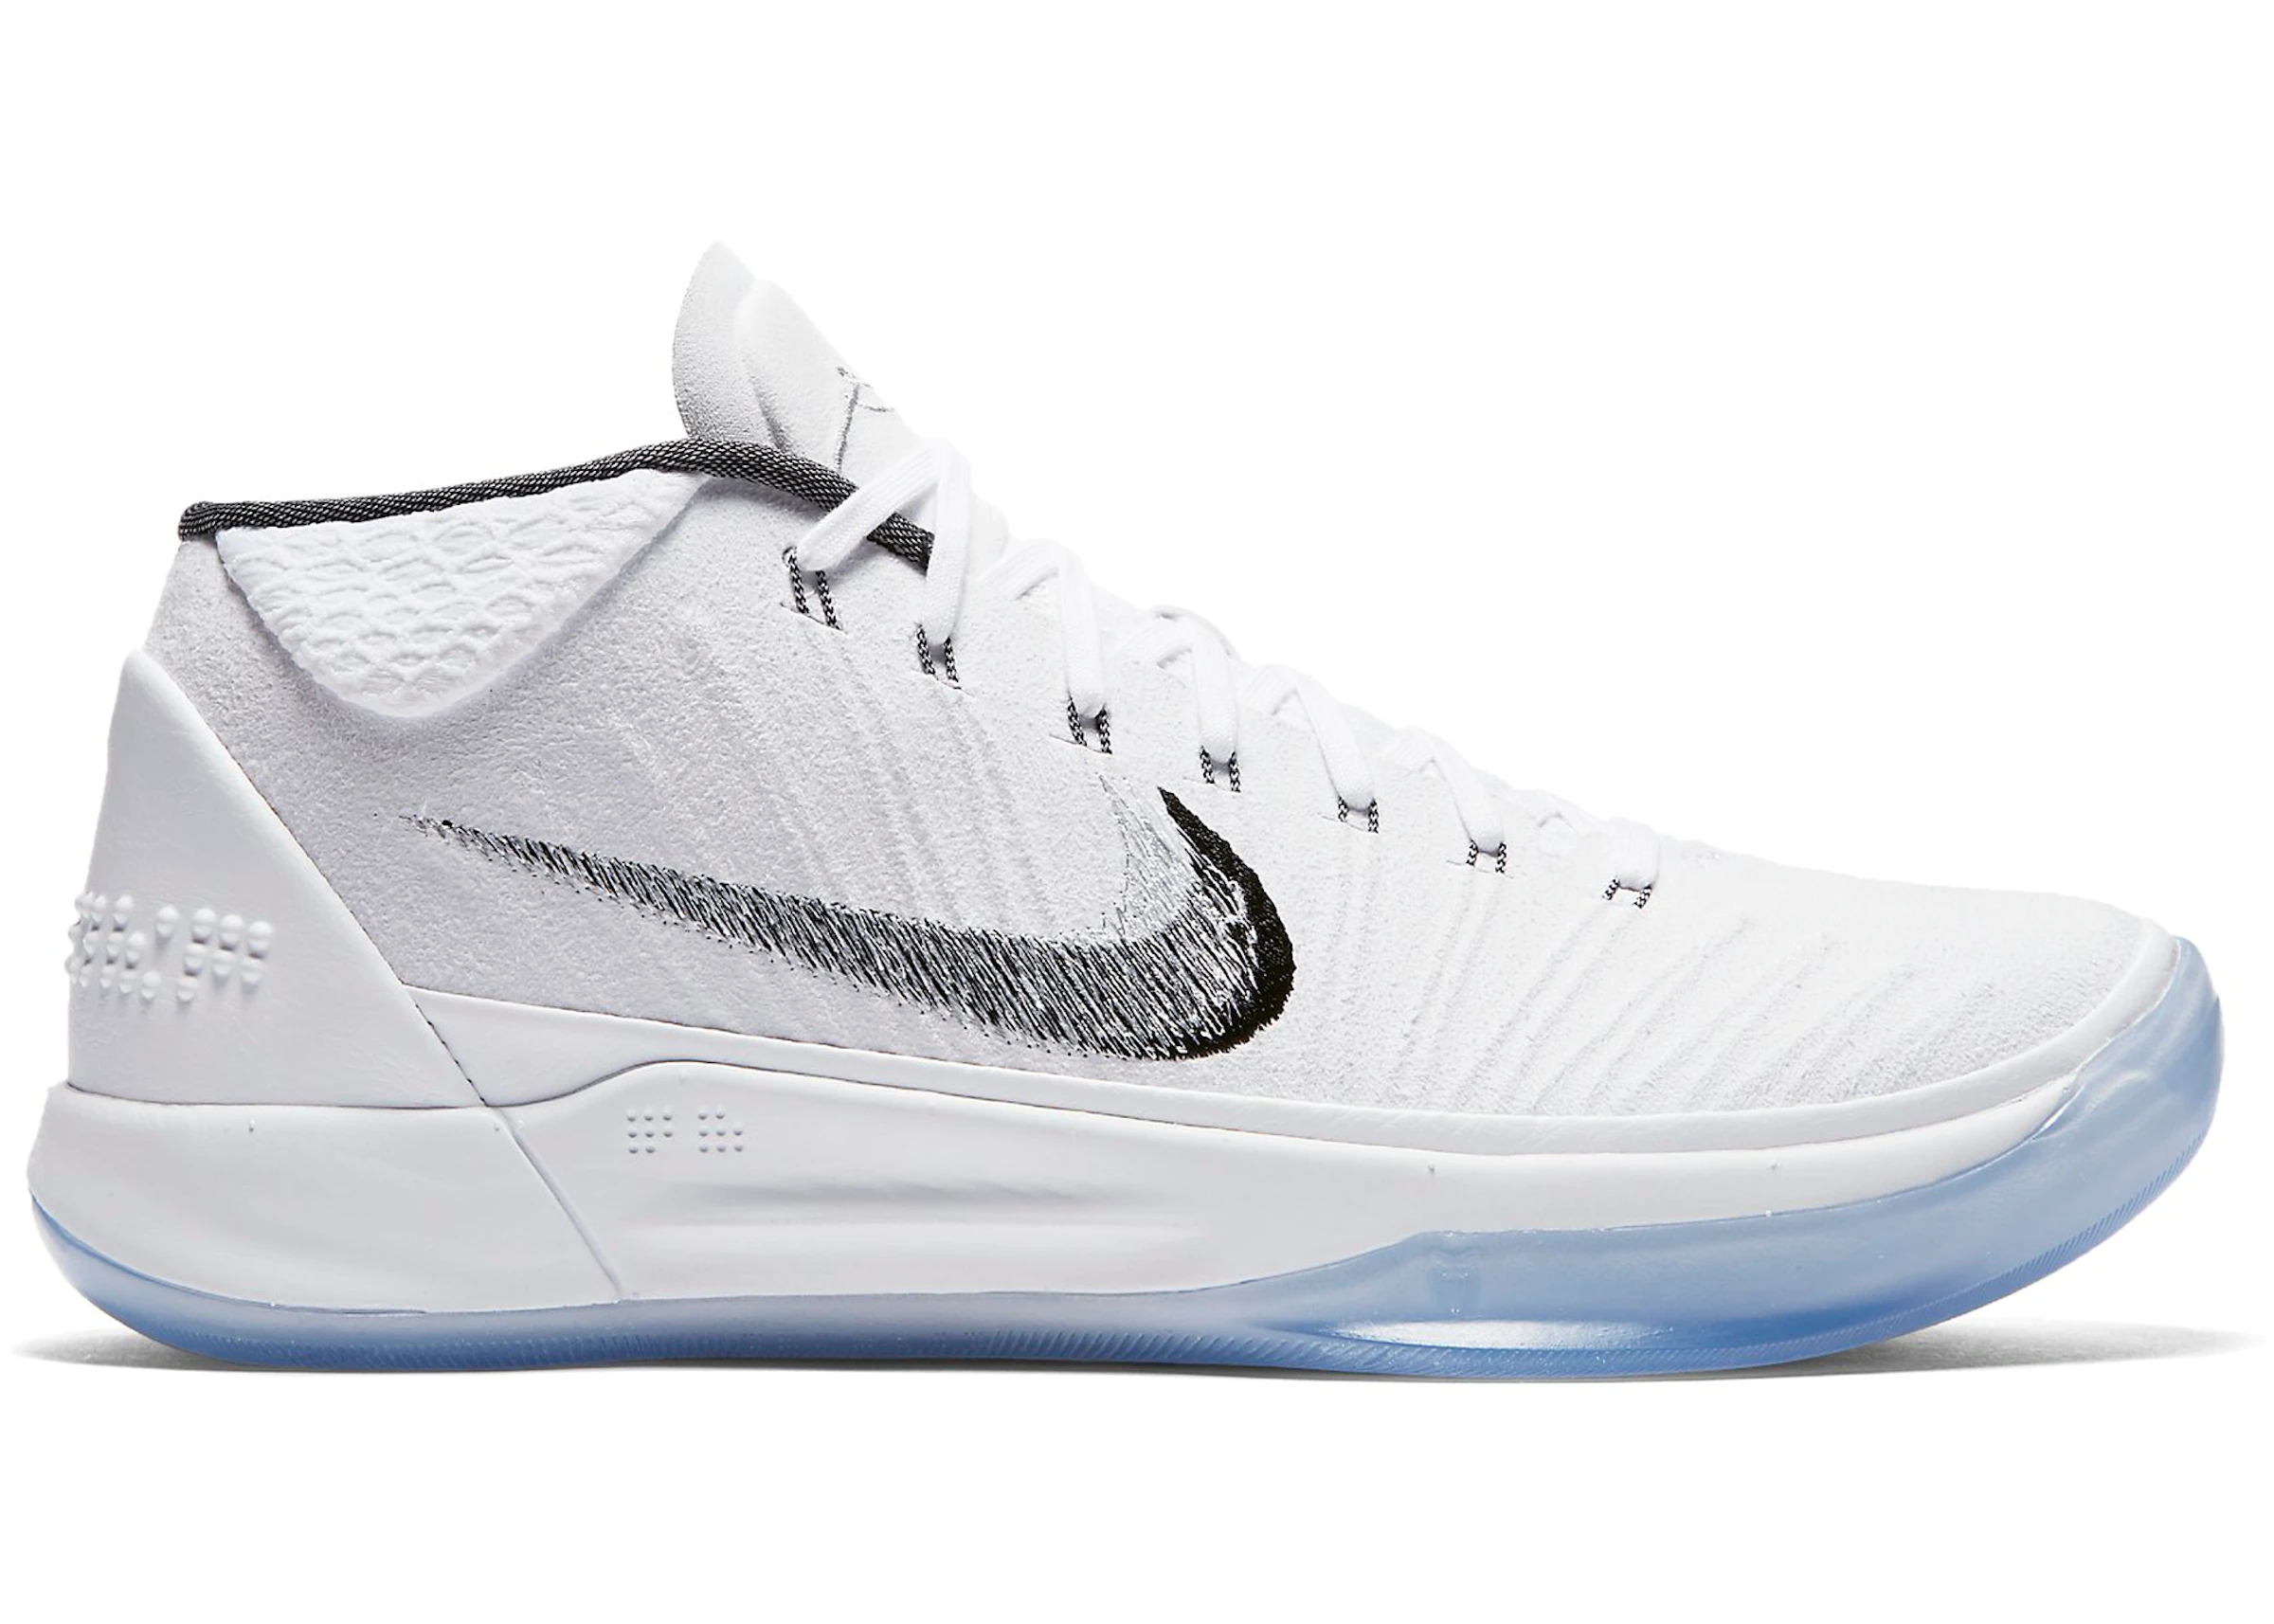 Buy Nike Kobe A.D. Shoes & New Sneakers - StockX